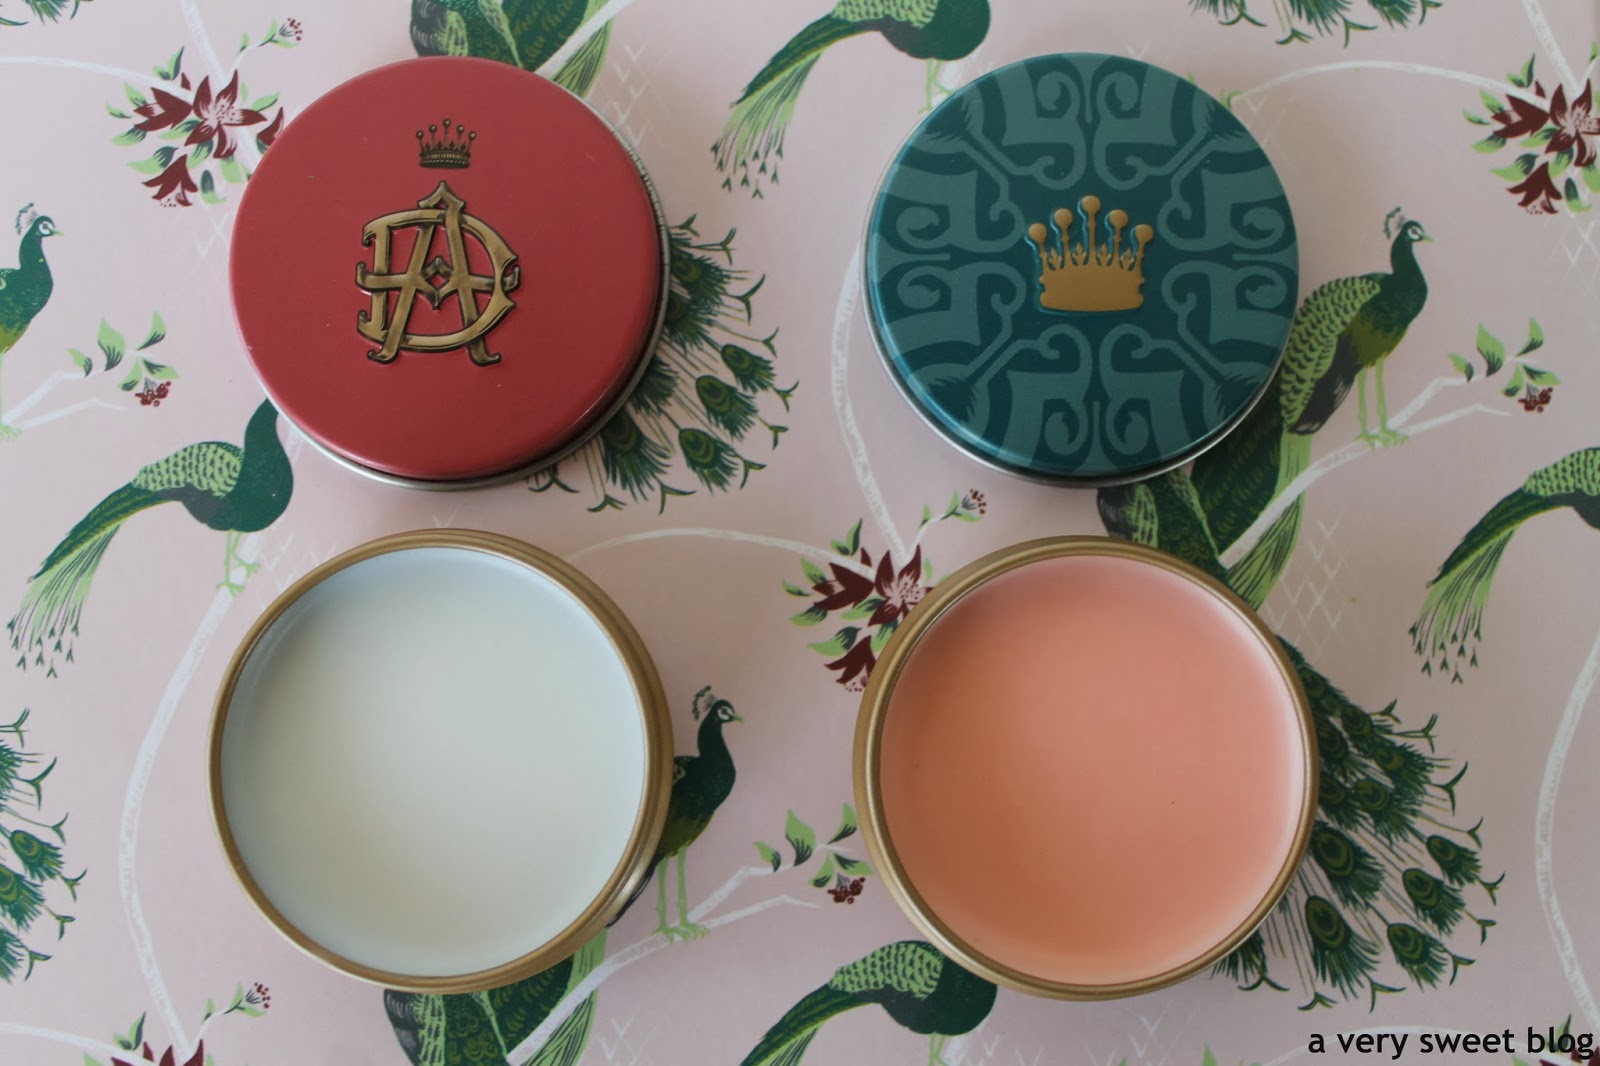 Downton Abbey Beauty Review & Giveaway | A Very Sweet Blog